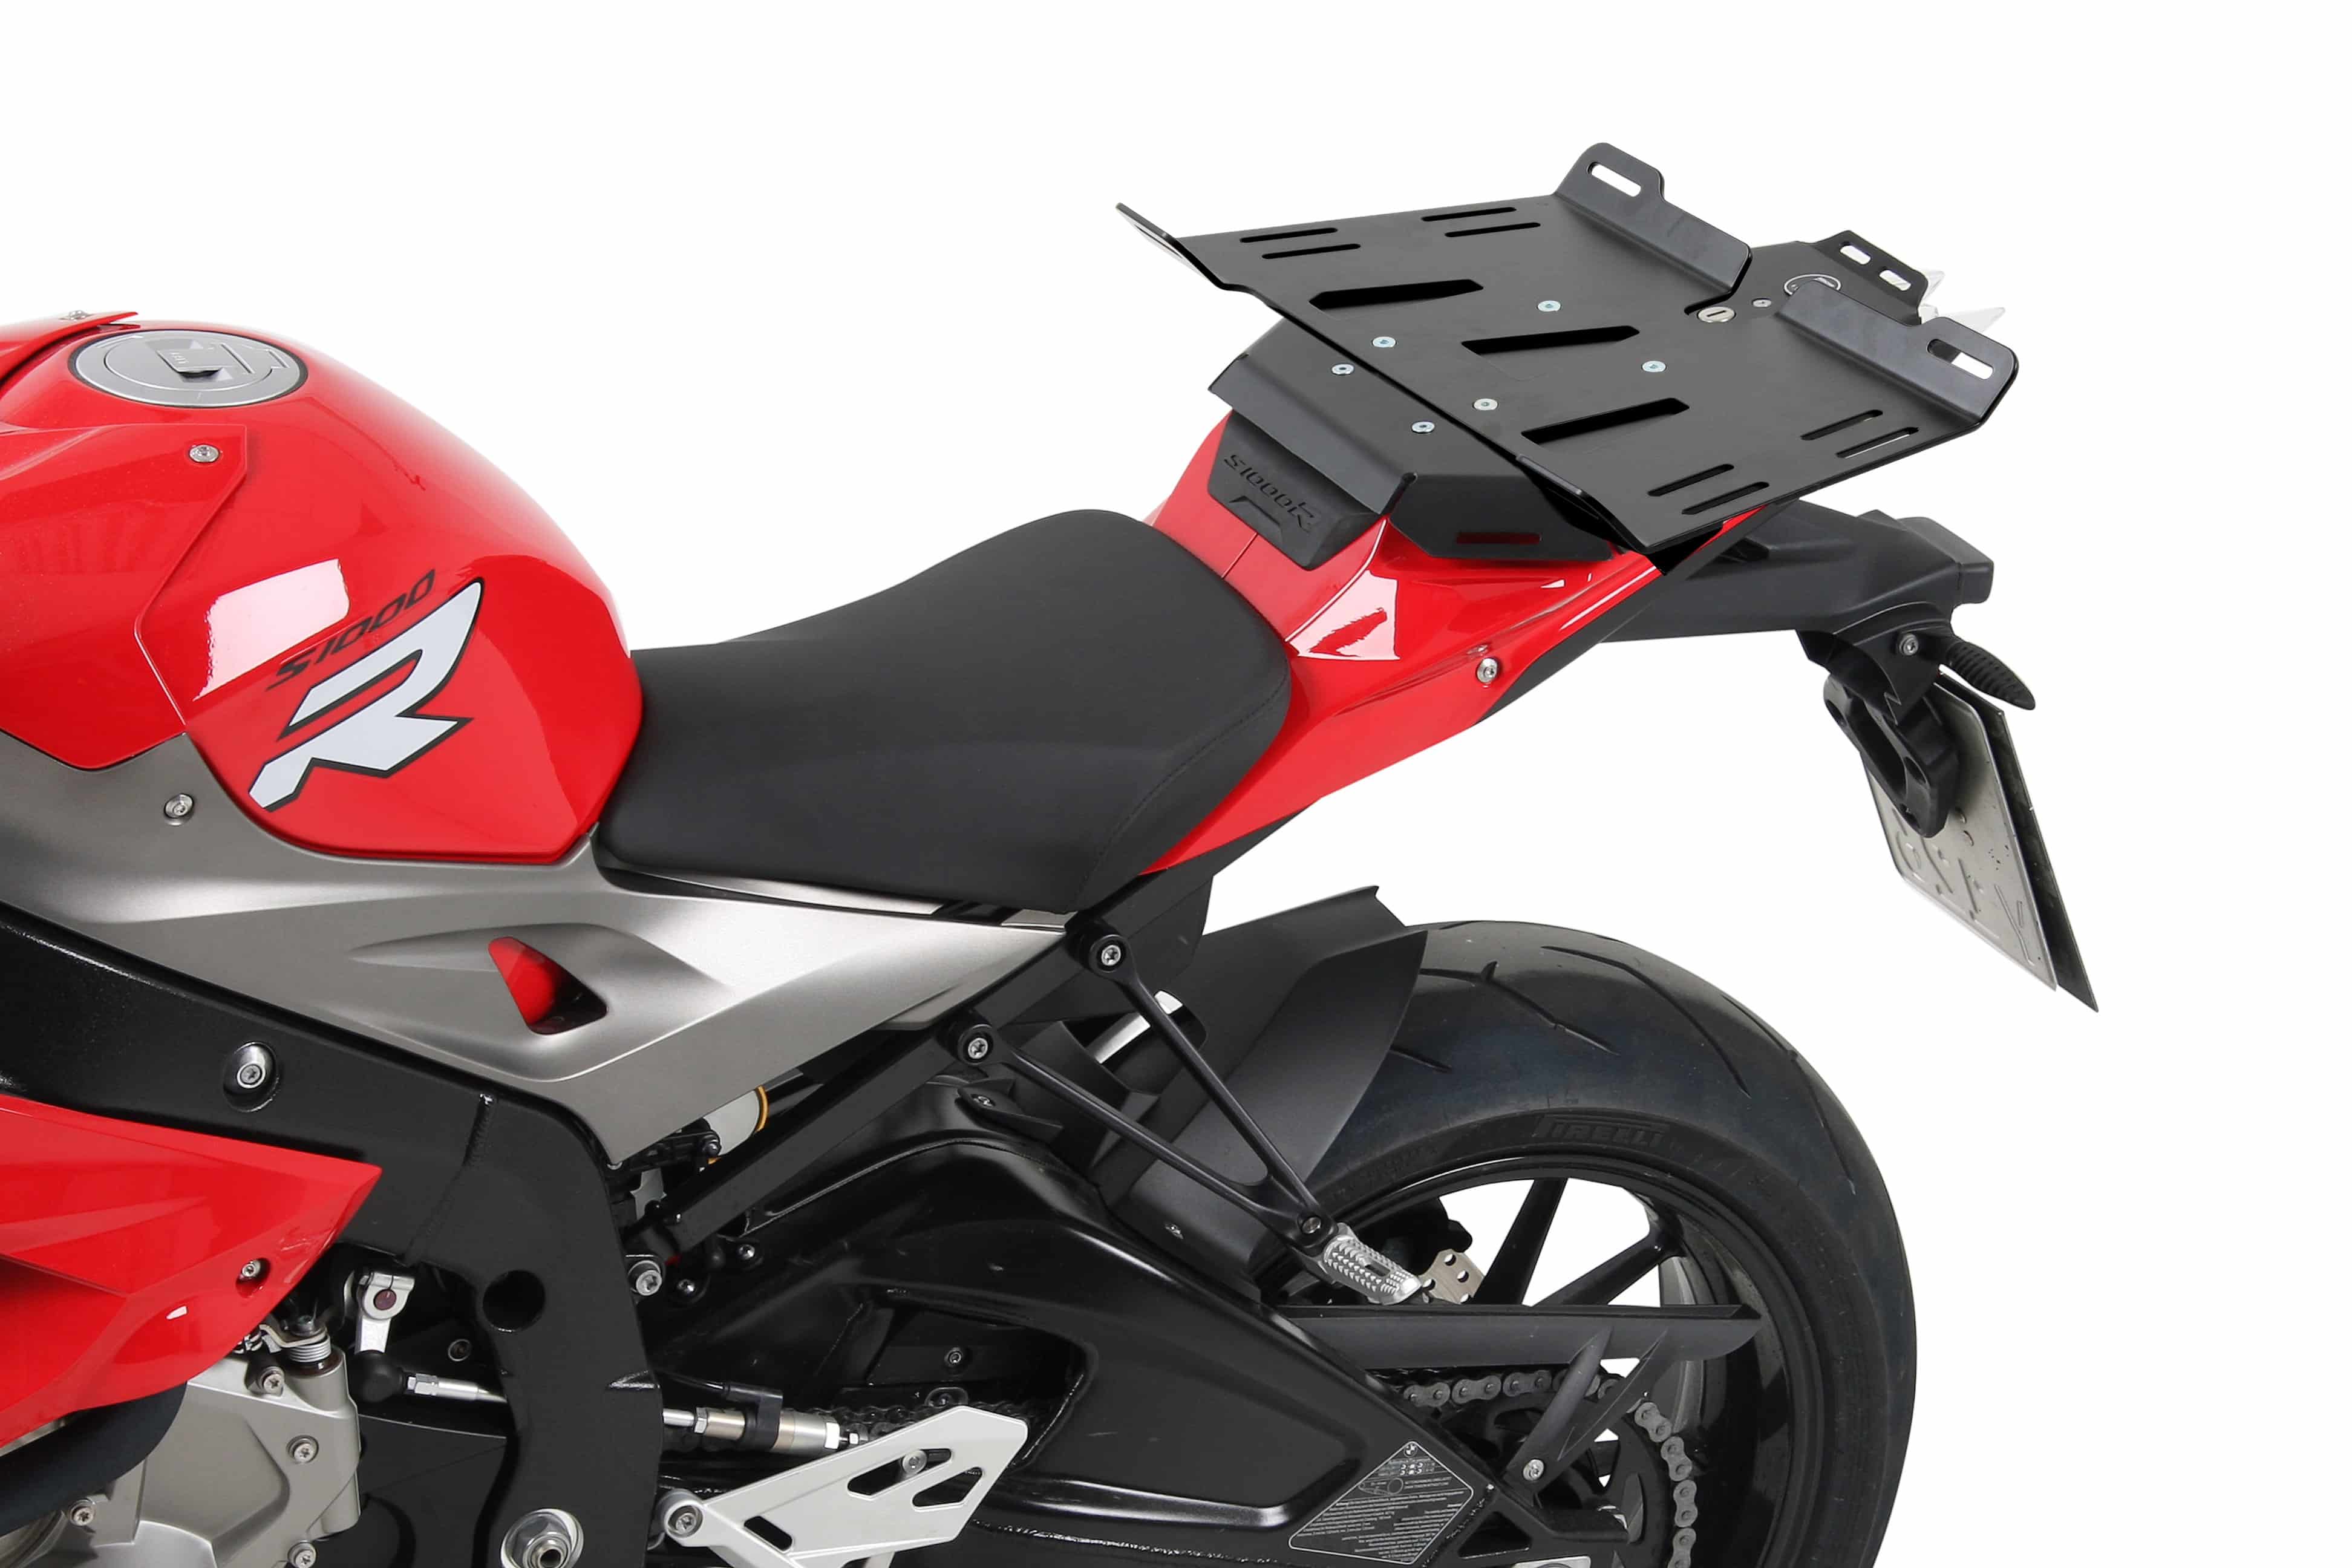 Modelspecific rear enlargement only in combination with Sportrack for BMW S 1000 RR (2012-2015)